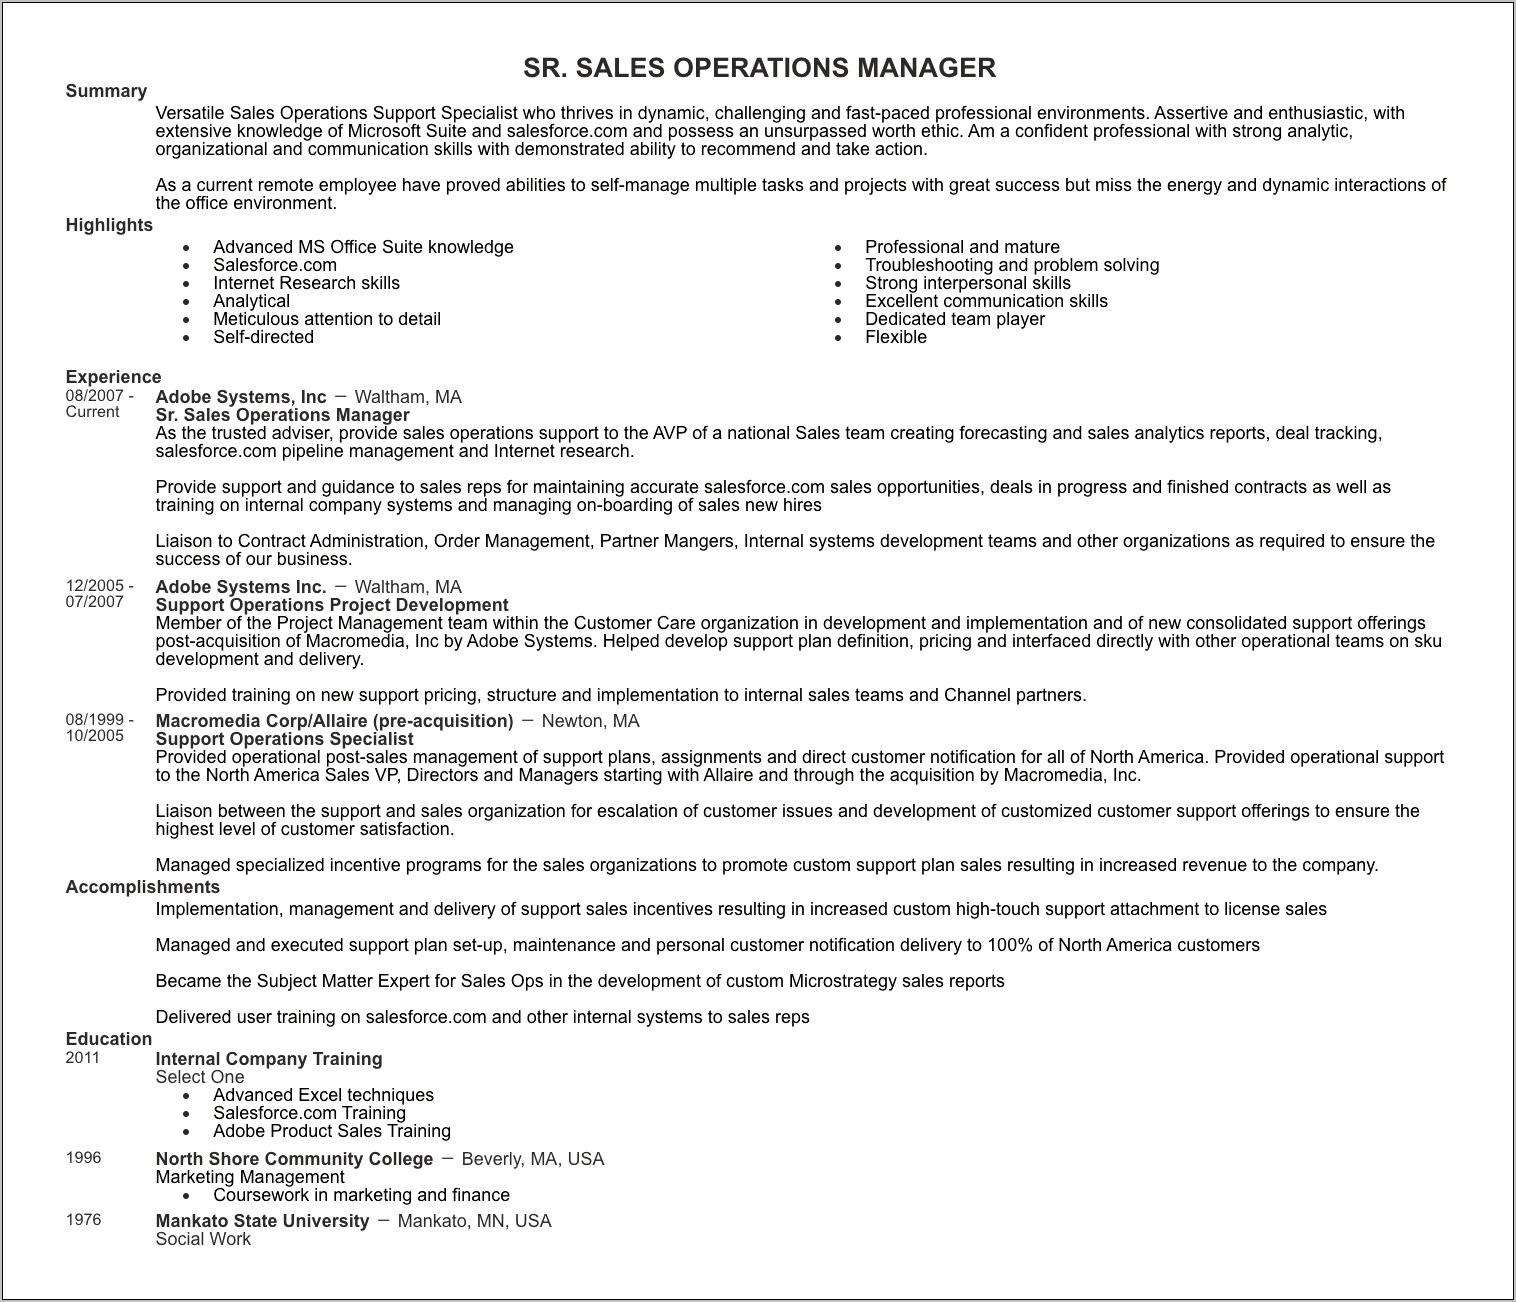 Resume Strengths And Skills Sales Position